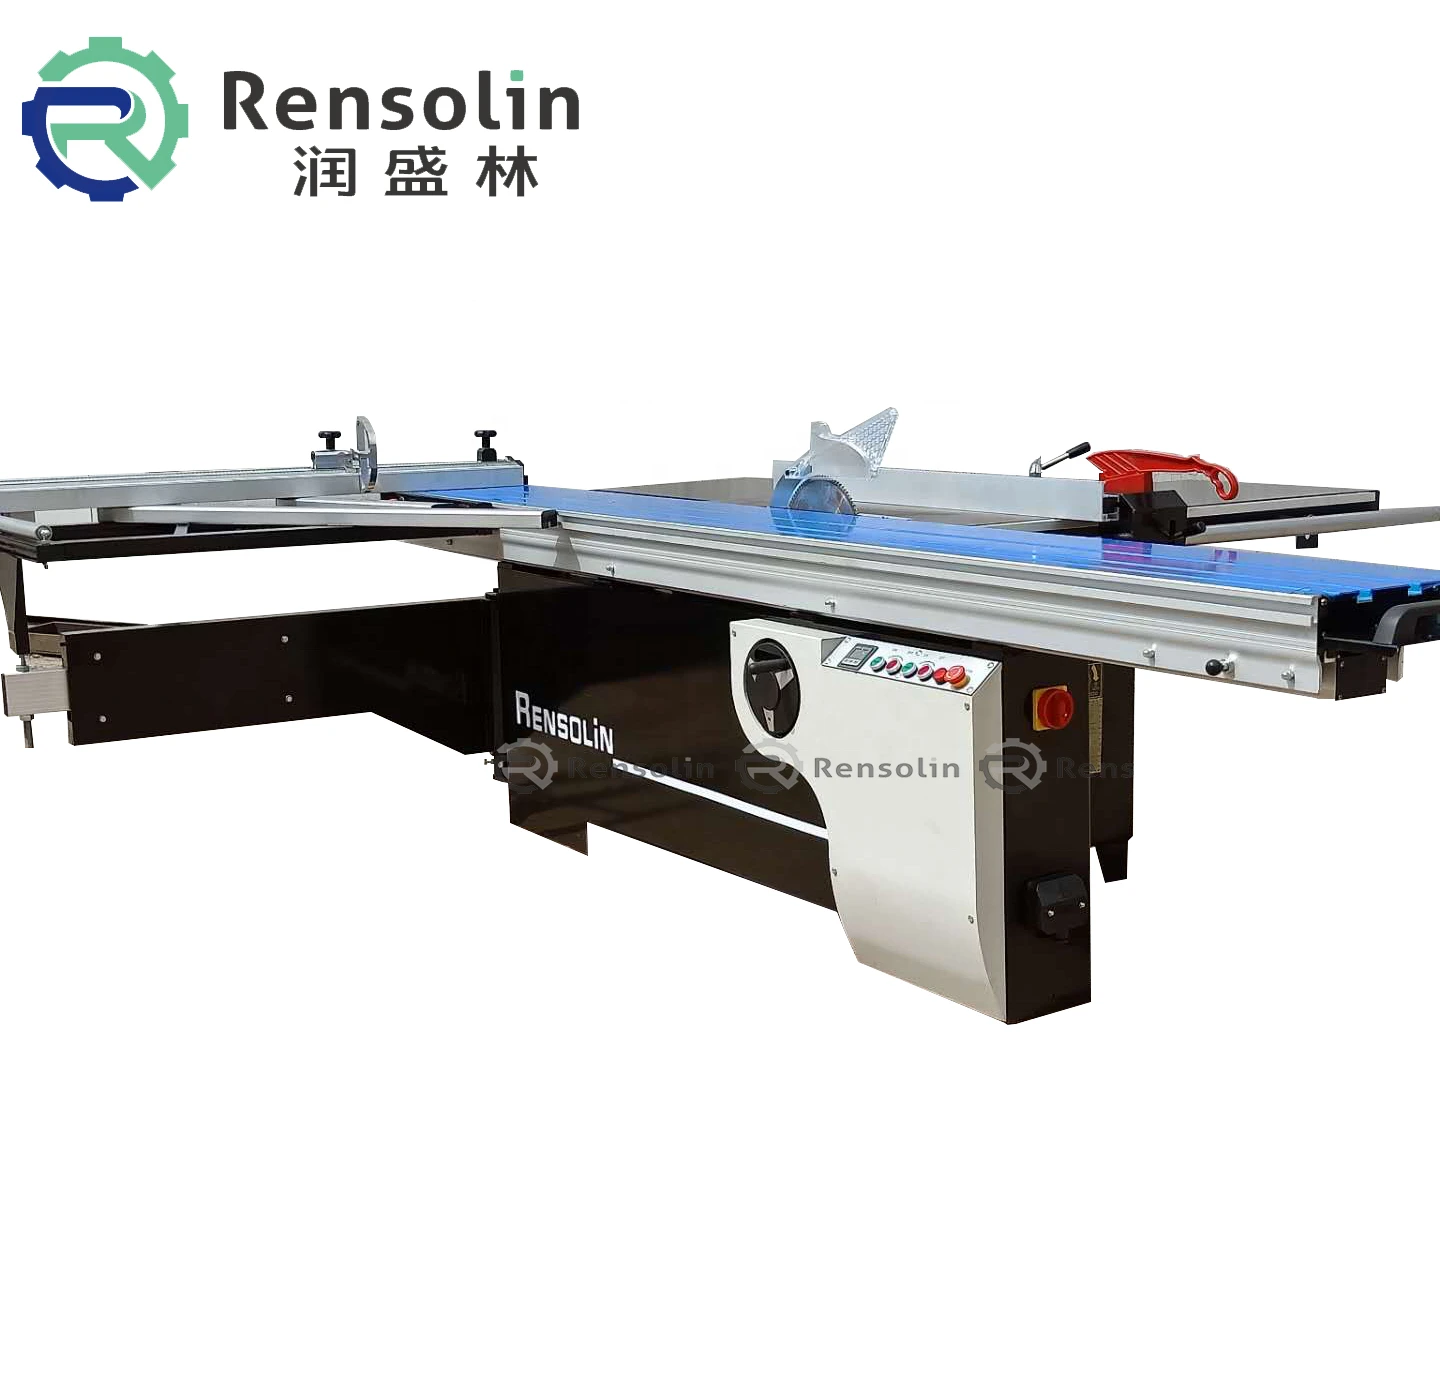 Horizontal woodworking combinate multifunction table saw machine with planer